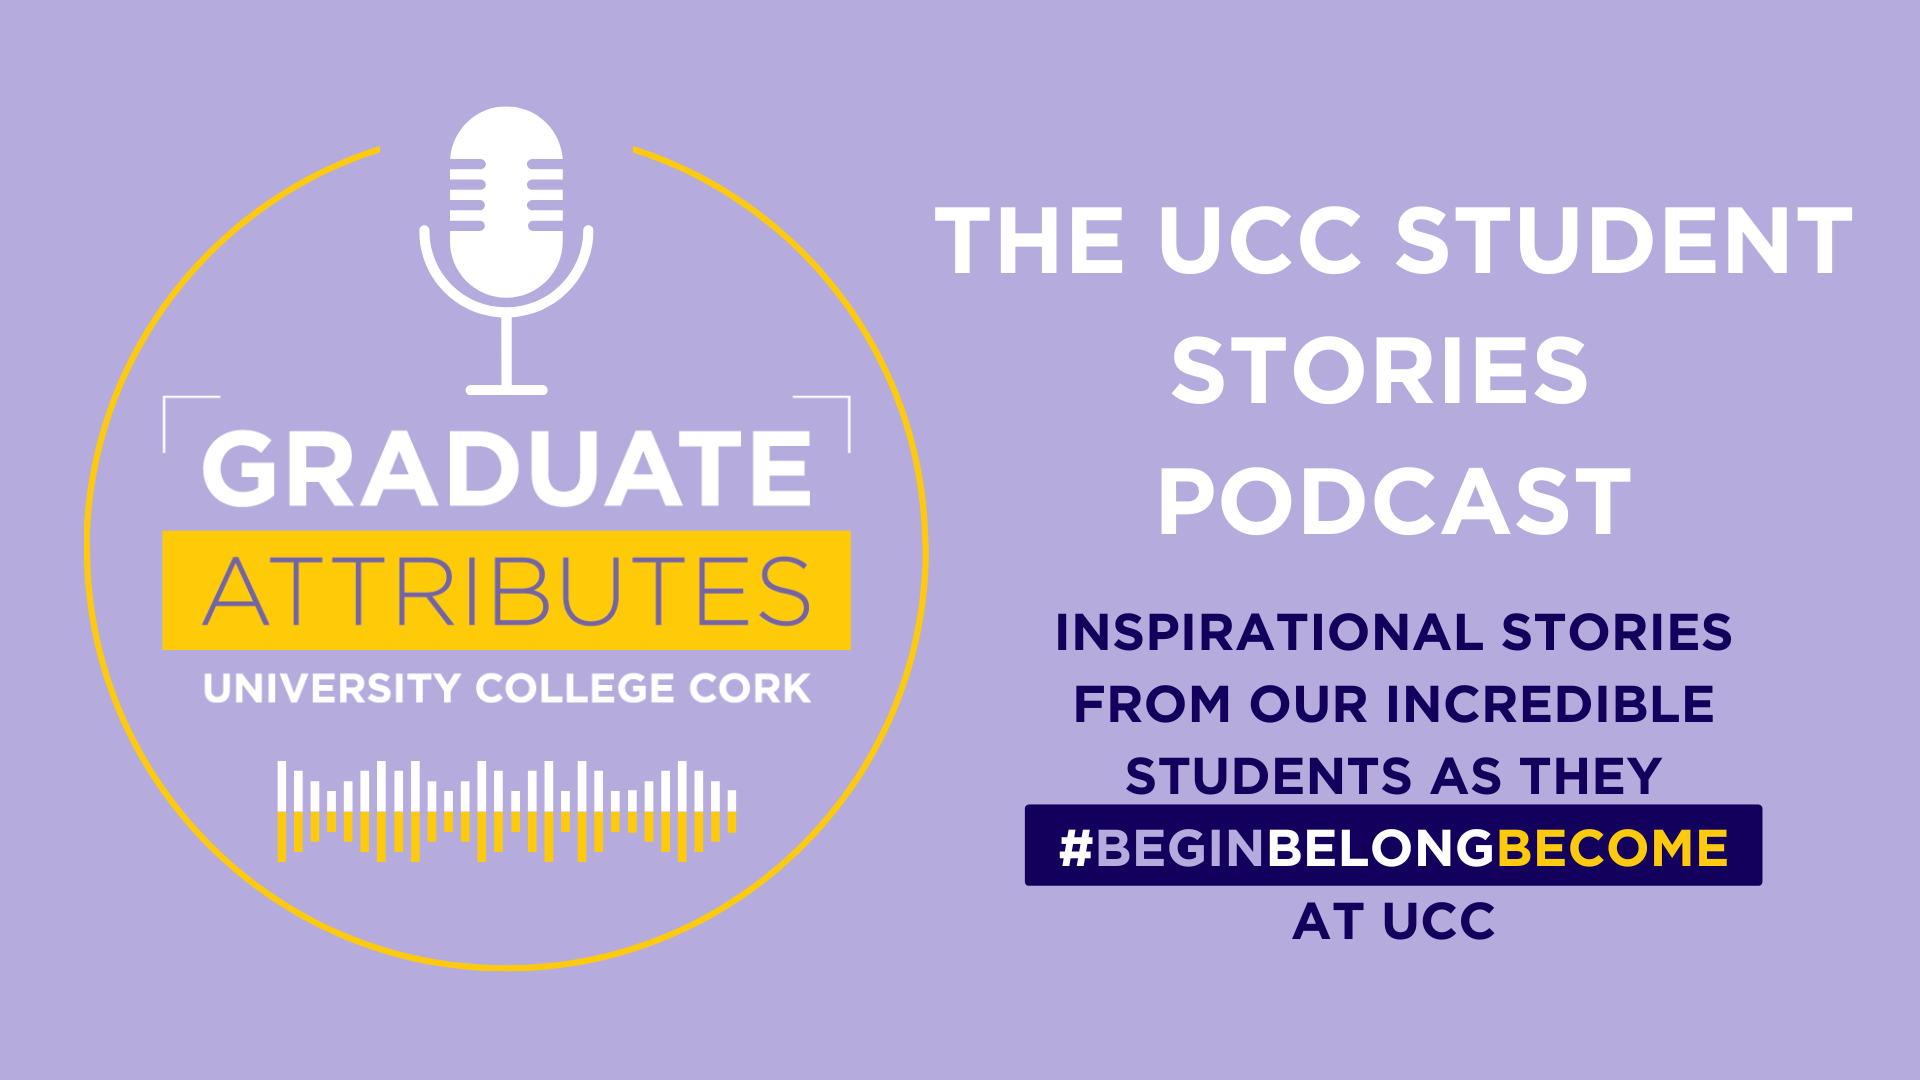 UCC Student Stories Podcast